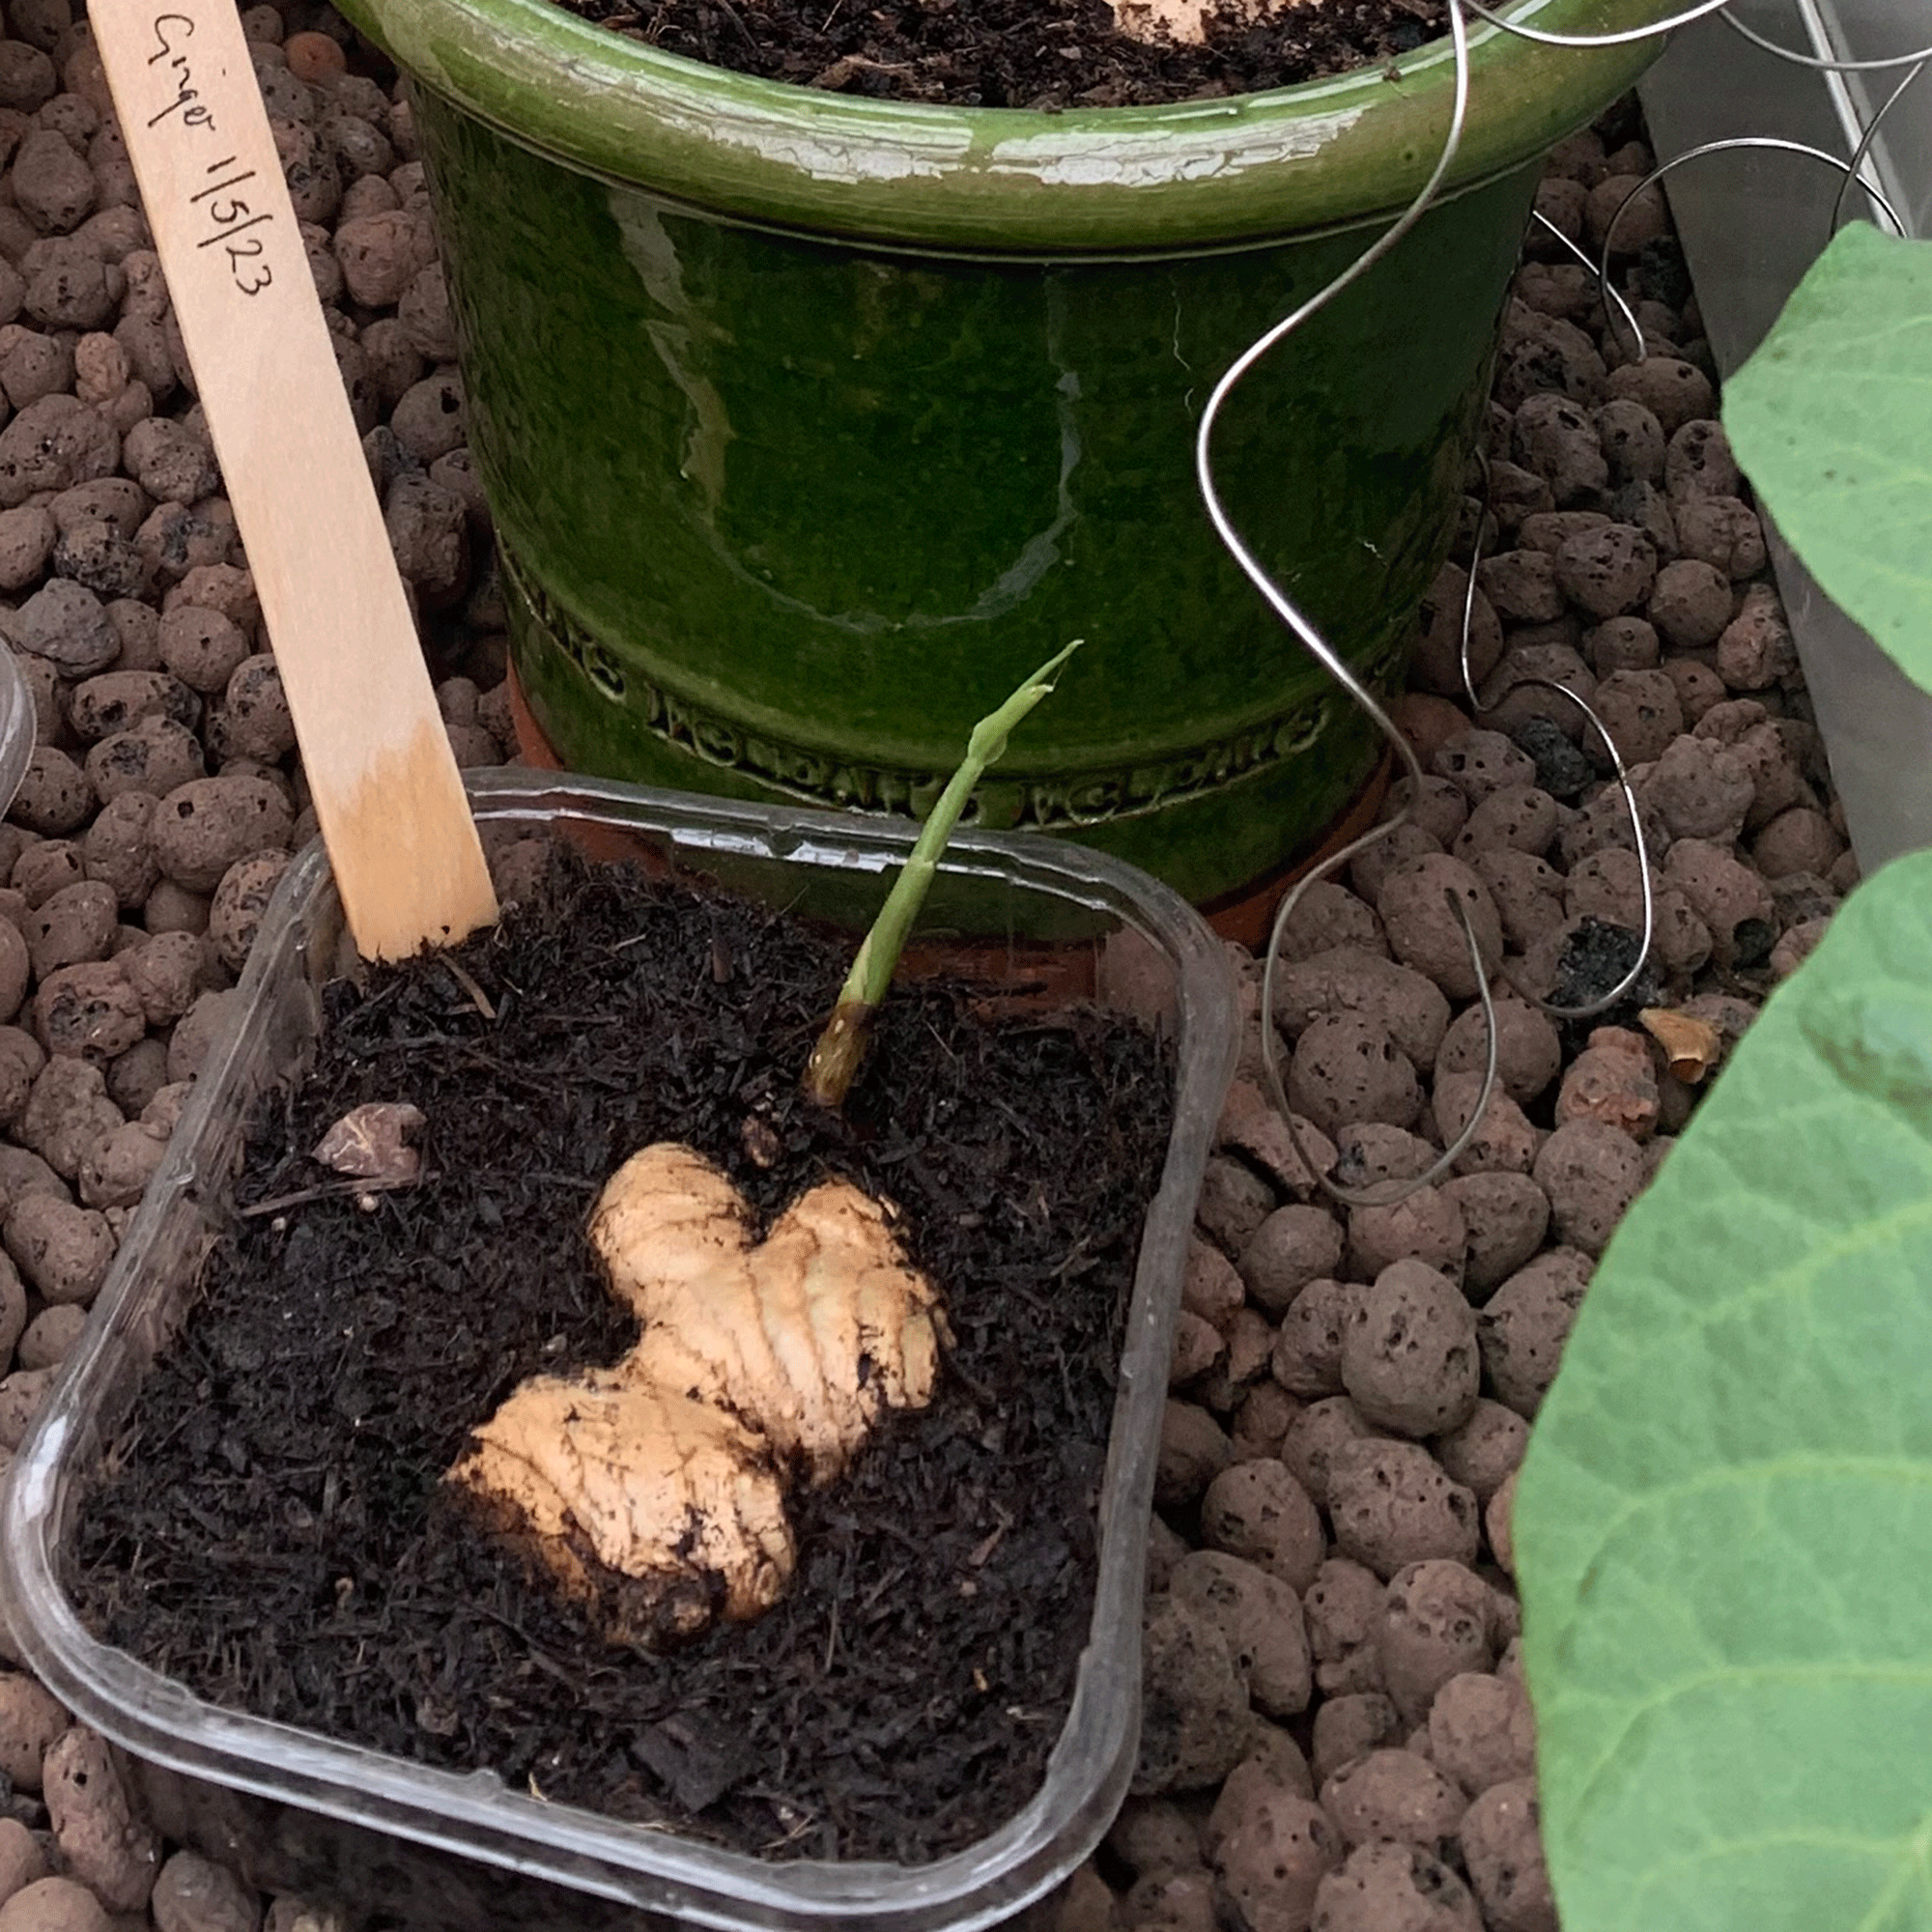 Ginger growing in a pot in a green house